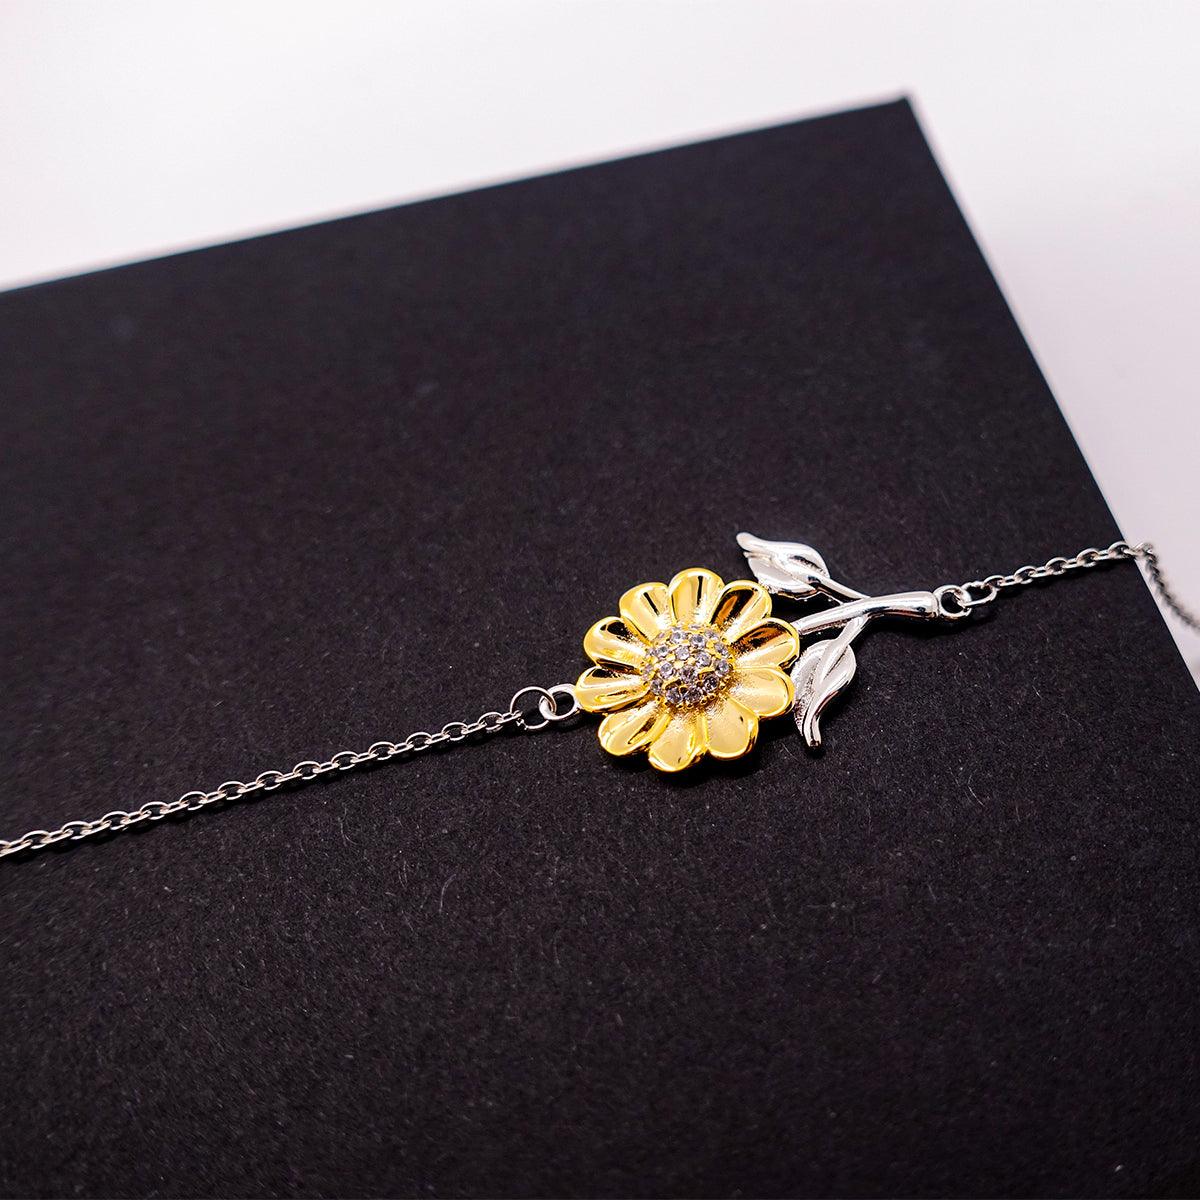 Motivational Nephew Sunflower Bracelet- I can promise to love you for the rest of my life, Birthday, Christmas Holiday Jewelry Gift - Mallard Moon Gift Shop